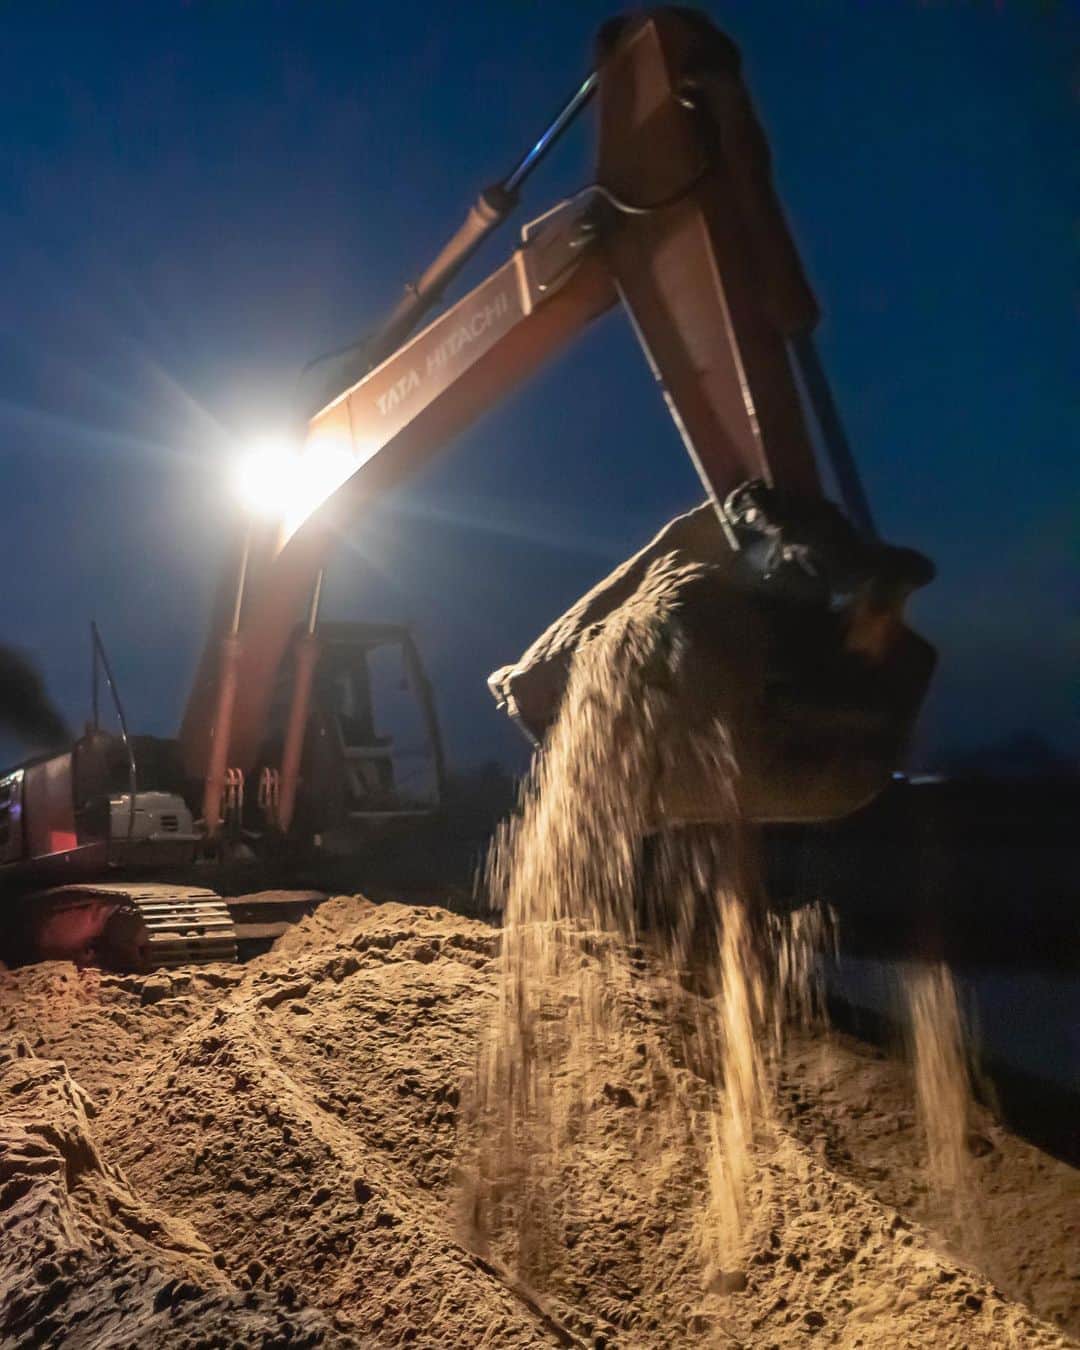 ジョン・スタンメイヤーさんのインスタグラム写真 - (ジョン・スタンメイヤーInstagram)「Ethical access is important. If the access connects to the unkind things we do, it means everything. Although this operation may be legal, sand mining is often done illegally under cover of night. We spent time along many rivers in northern India where illegal sand mining took place. Always welcome, within seconds of saying I was a photographer, the response was, "No photos!". It wasn't until reaching the Son River in Bihar that I knew someone, who knew someone, who knew someone else who might give us access. An overnight stay in Dheri, the next morning, I met someone who knew all the other someone's. Greeted warmly and welcomed for chai, he assured me his sand mining activities were legal, but all the rest of the vast machine activity within walking distance, maybe not. It was strange, the man had a security guard who openly carried a giant shotgun and joined us for chai. I realized perhaps his sand extraction for India's booming construction industry was legit, he might be needing protection from others…there are many news reports of killings and vendetta's in his profession. After pleasant talks learning about this business, he said I could photograph whatever I wished, as often as I liked. That evening the shoreline along the Son was alive in big moving machines, filling trucks with sand lit like discos while the river was low before monsoon season. With all the unfathomable grains of sand in the Son, we might imagine removing some would not matter. Amplify it by hundreds, maybe thousands of mining operations across India's vast river systems, and we have an environmental catastrophe like nowhere else on earth. Altering entire ecosystems, destroying habitat, endangering river dolphins, and eroding land that directly affects people's livelihoods and our planet. ⠀⠀⠀⠀⠀⠀⠀ India’s Daunting Challenge: There’s Water Everywhere, And Nowhere - Chapter 8 of the @outofedenwalk, my latest story in the August 2020 issue of @natgeo magazine. ⠀⠀⠀⠀⠀⠀⠀ @natgeo @outofedenwalk #walkingindia #edenwalk #india #bihar #sonriver #sandmining #trucks #discolights #environment」8月12日 11時32分 - johnstanmeyer